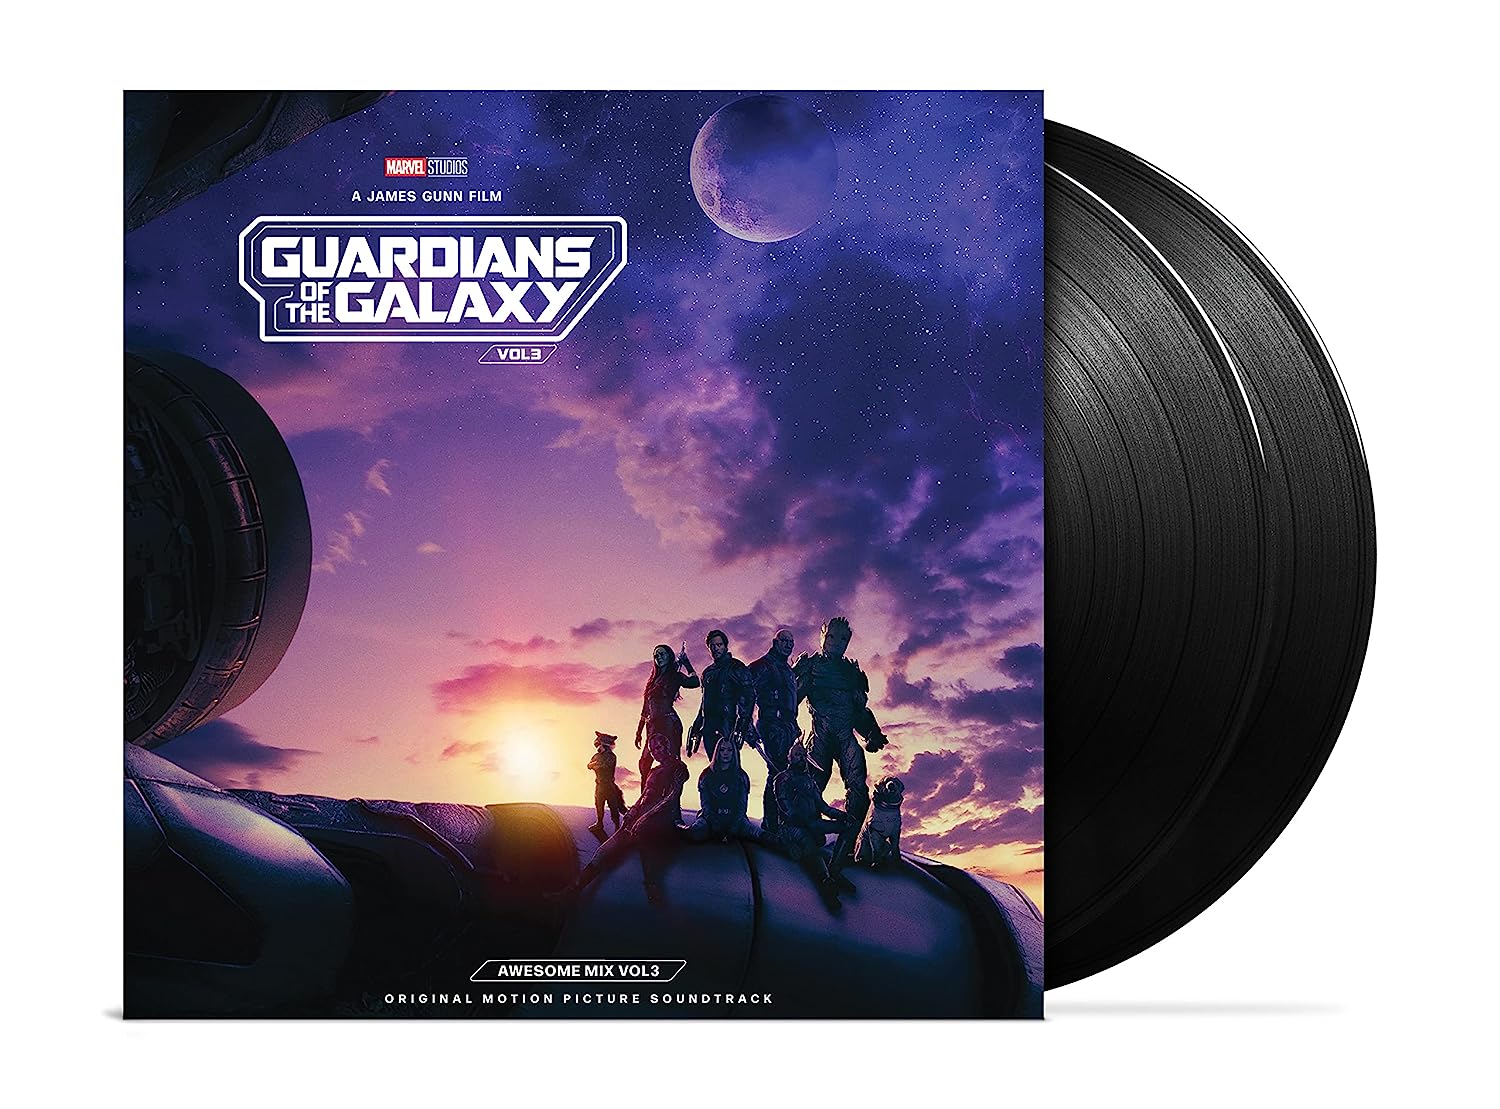 GUARDIANS OF THE GALAXY VOL. 3: AWESOME MIX VOL. 3. 2LP